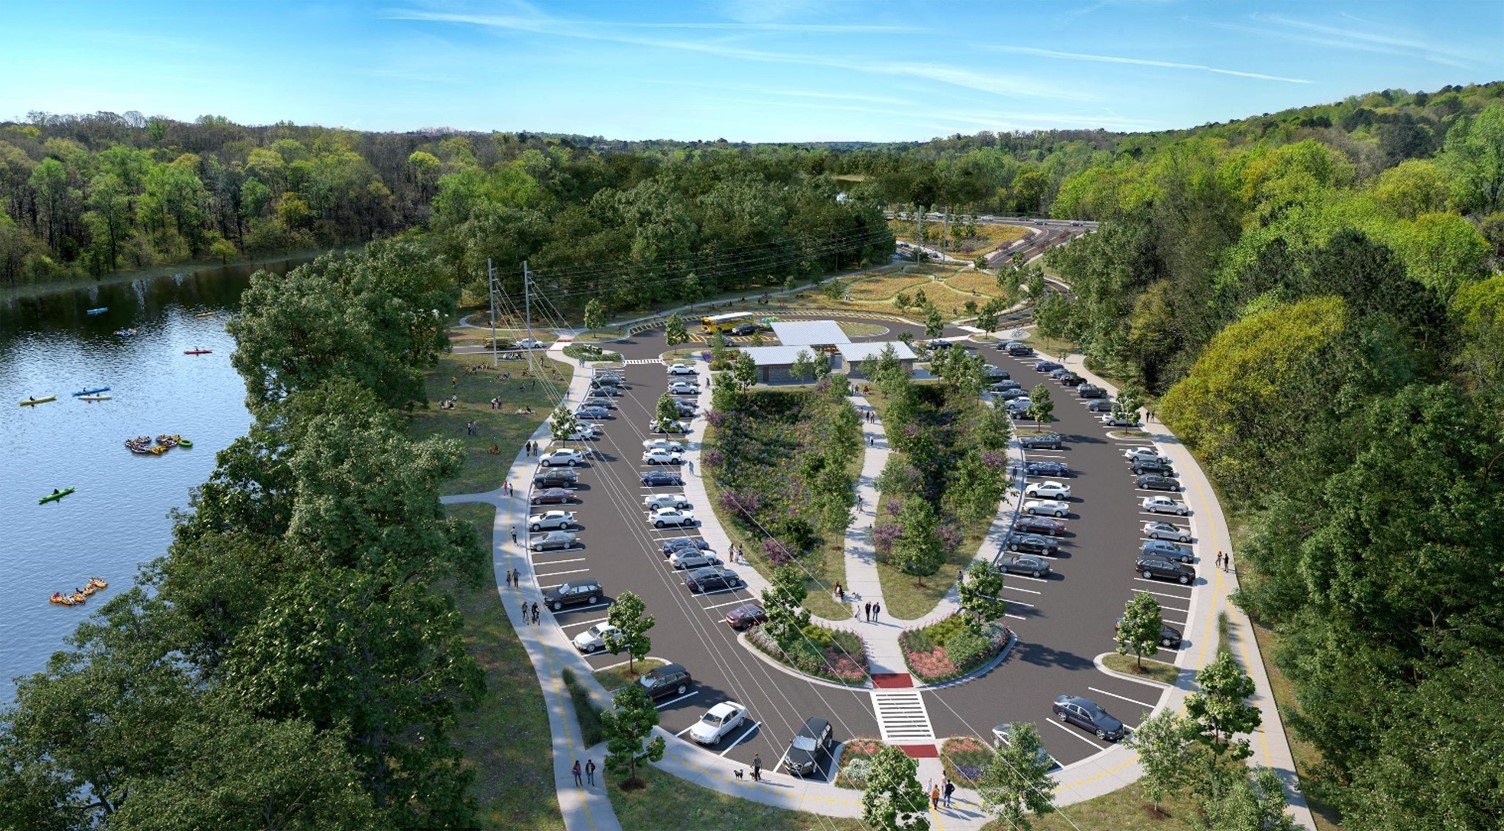 The Park Unit's parking lot will be reimagined. Allow for improved vehicular circulation.